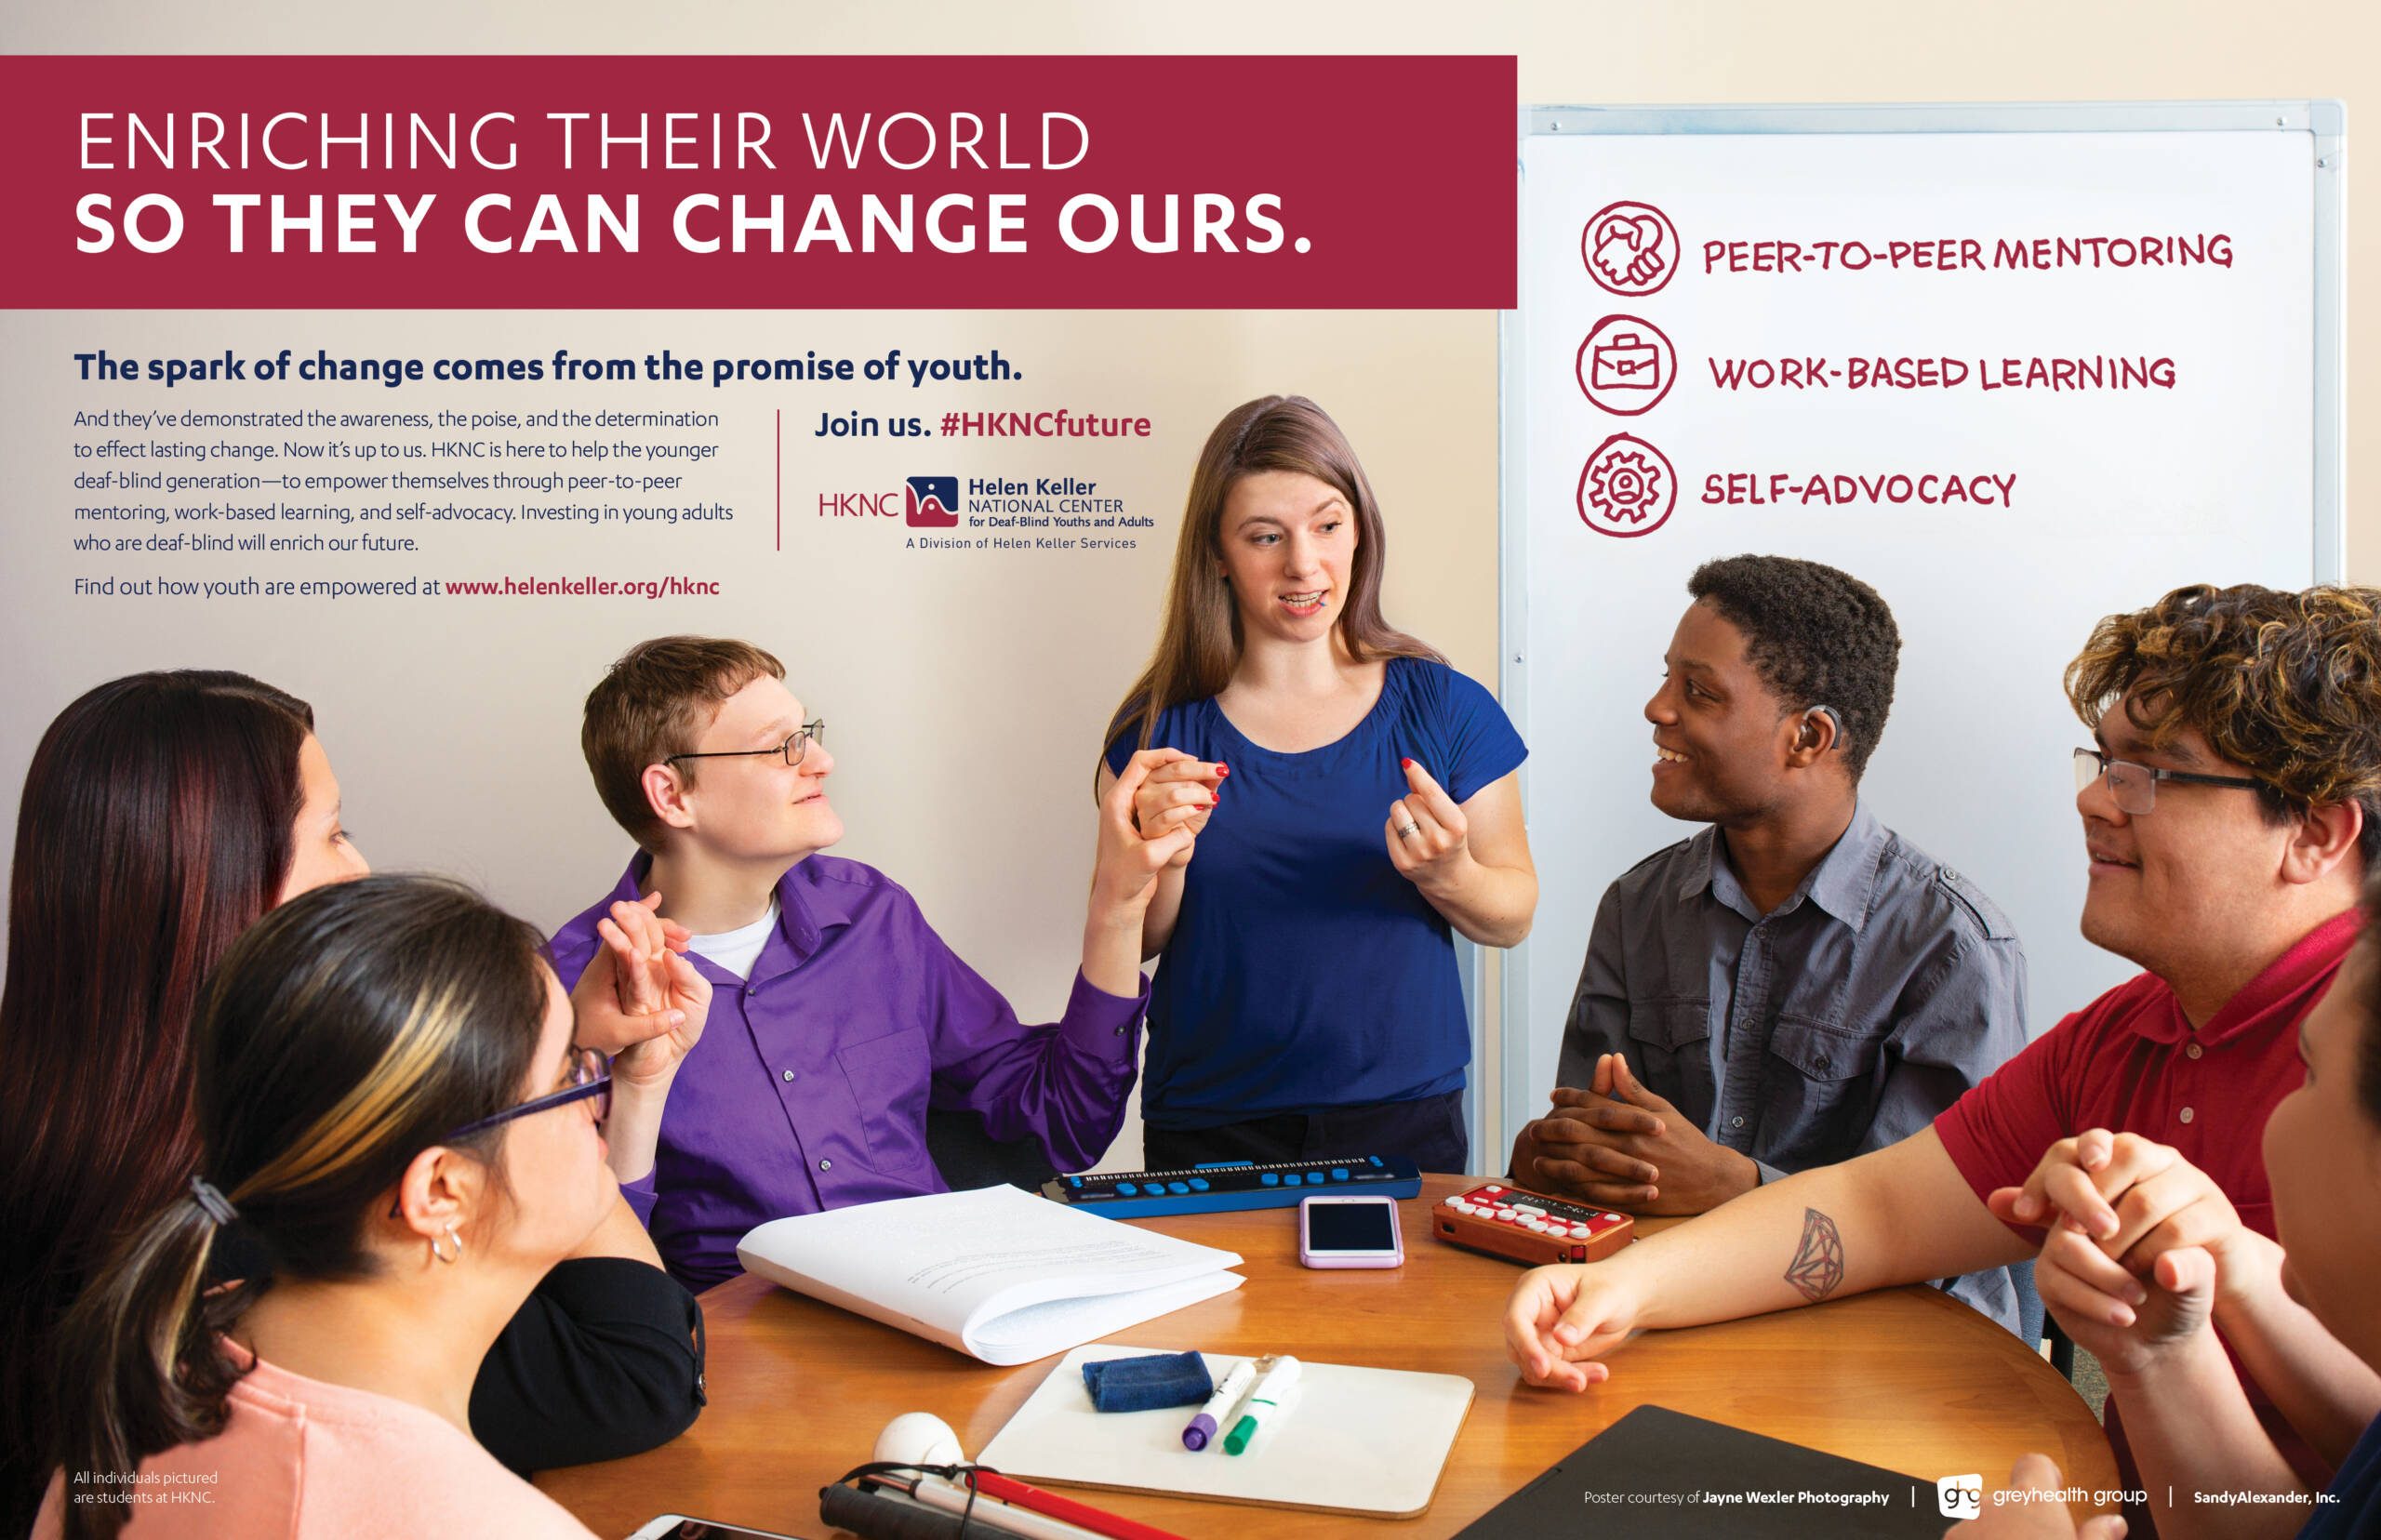 A poster with heading “Enriching Their World So They Can Change Ours”. A young woman is standing signing to five young men and women sitting around a table.